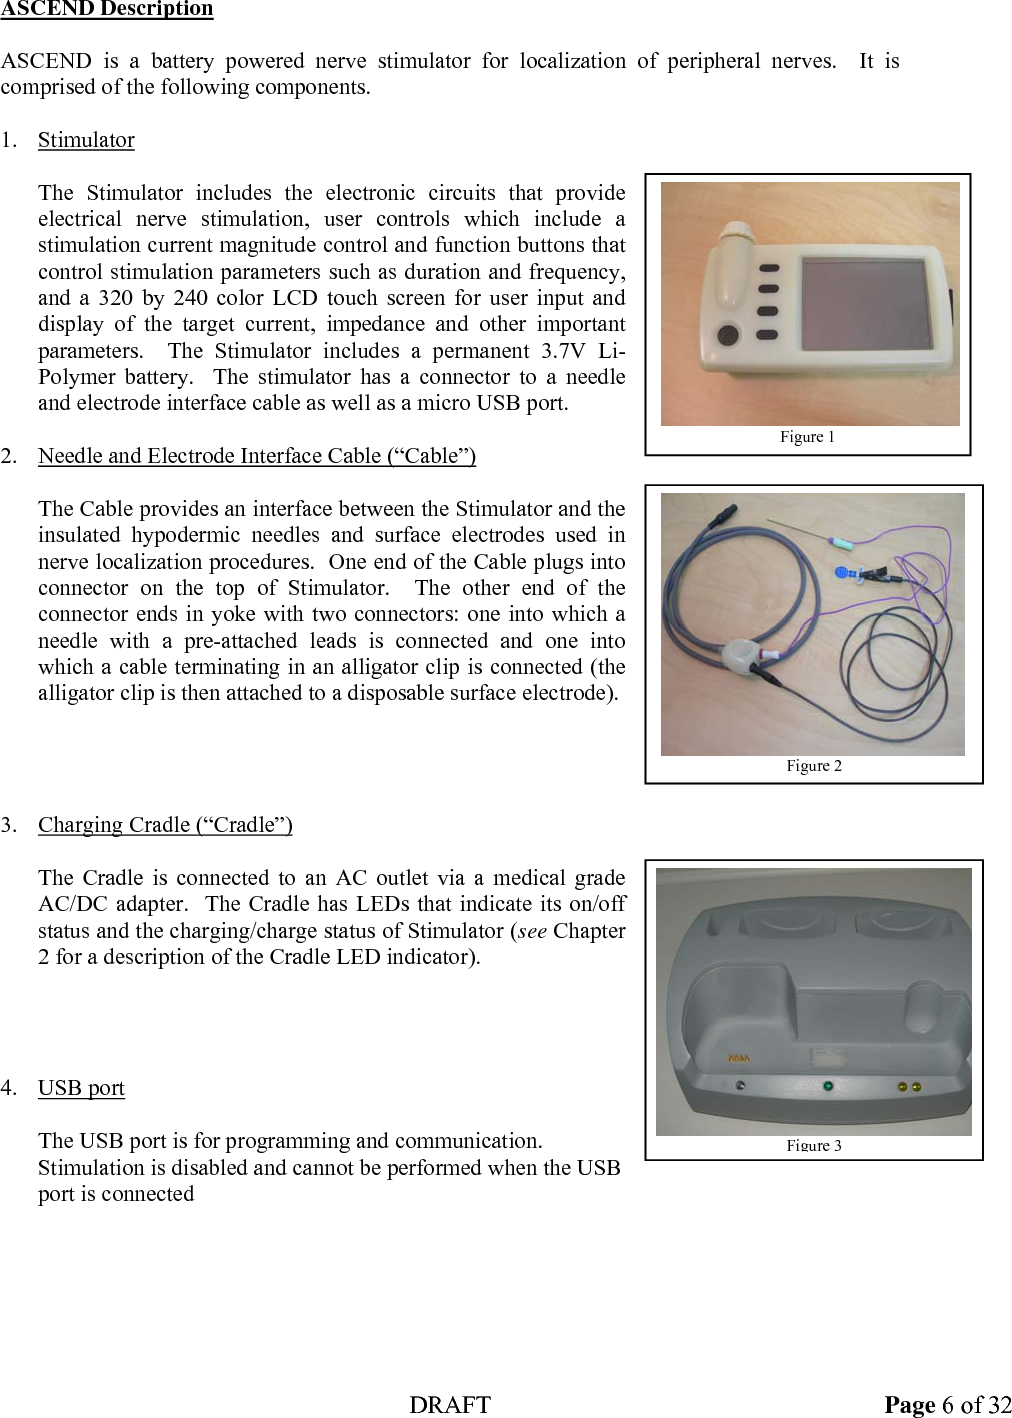  DRAFT Page 6 of 32 ASCEND Description  ASCEND is a battery powered nerve stimulator for localization of peripheral nerves.  It is comprised of the following components.  1. Stimulator  The Stimulator includes the electronic circuits that provide electrical nerve stimulation, user controls which include a stimulation current magnitude control and function buttons that control stimulation parameters such as duration and frequency, and a 320 by 240 color LCD touch screen for user input and display of the target current, impedance and other important parameters.  The Stimulator includes a permanent 3.7V Li-Polymer battery.  The stimulator has a connector to a needle and electrode interface cable as well as a micro USB port.  2. Needle and Electrode Interface Cable (“Cable”)  The Cable provides an interface between the Stimulator and the insulated hypodermic needles and surface electrodes used in nerve localization procedures.  One end of the Cable plugs into connector on the top of Stimulator.  The other end of the connector ends in yoke with two connectors: one into which a needle with a pre-attached leads is connected and one into which a cable terminating in an alligator clip is connected (the alligator clip is then attached to a disposable surface electrode).     3. Charging Cradle (“Cradle”)  The Cradle is connected to an AC outlet via a medical grade AC/DC adapter.  The Cradle has LEDs that indicate its on/off status and the charging/charge status of Stimulator (see Chapter 2 for a description of the Cradle LED indicator).     4. USB port  The USB port is for programming and communication. Stimulation is disabled and cannot be performed when the USB port is connected    Figure 1 Figure 2Figure 3